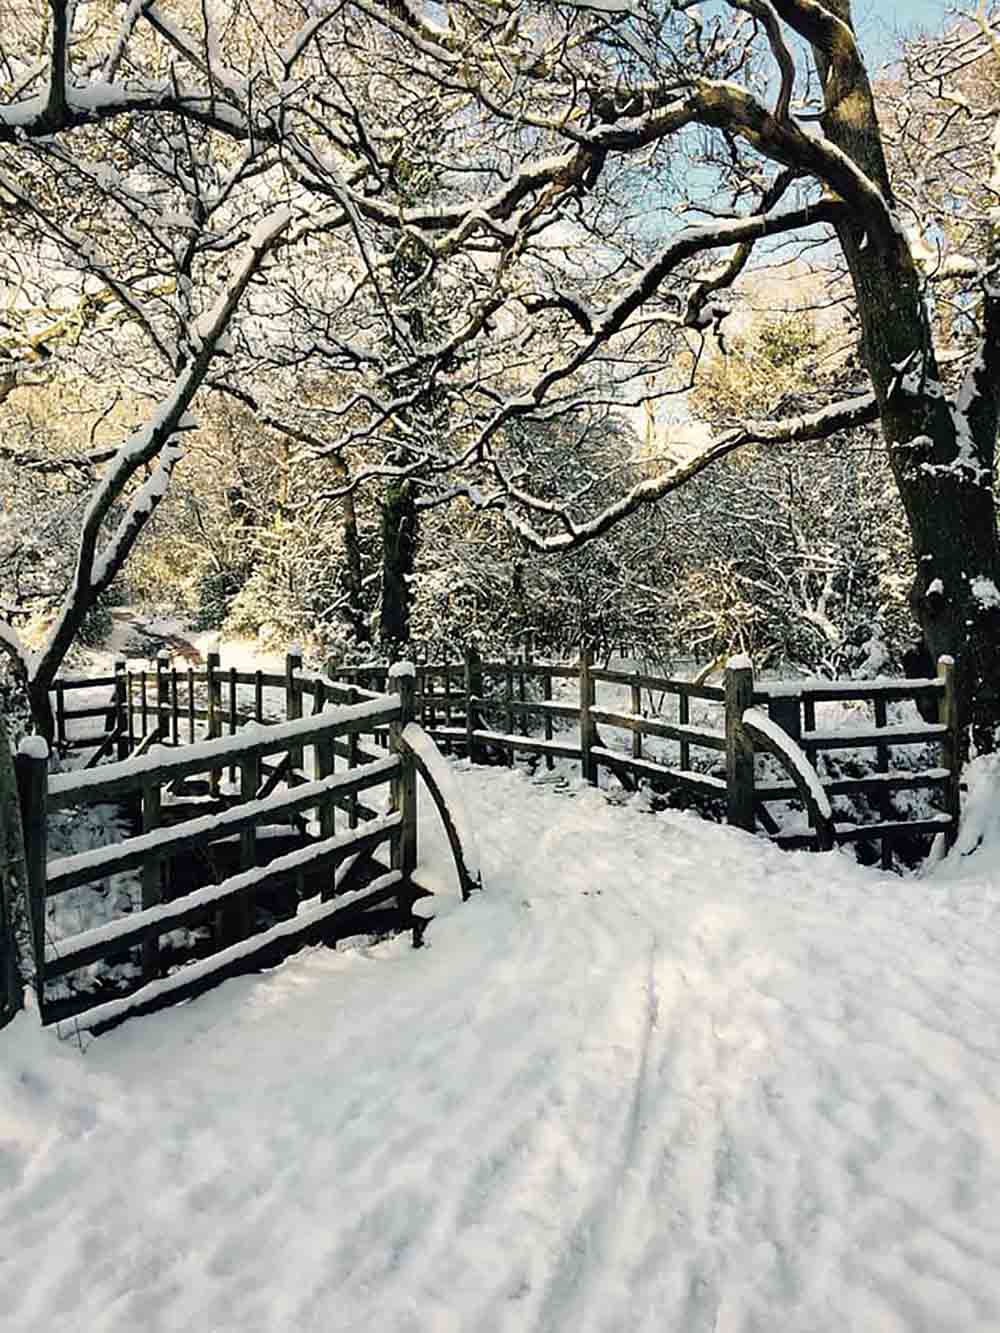   HEARTBREAKING images show how the iconic bridge from the Winnie-the-Pooh books has been "closed indefinitely" after being demolished by a fallen tree - Nature News Scotland/UK